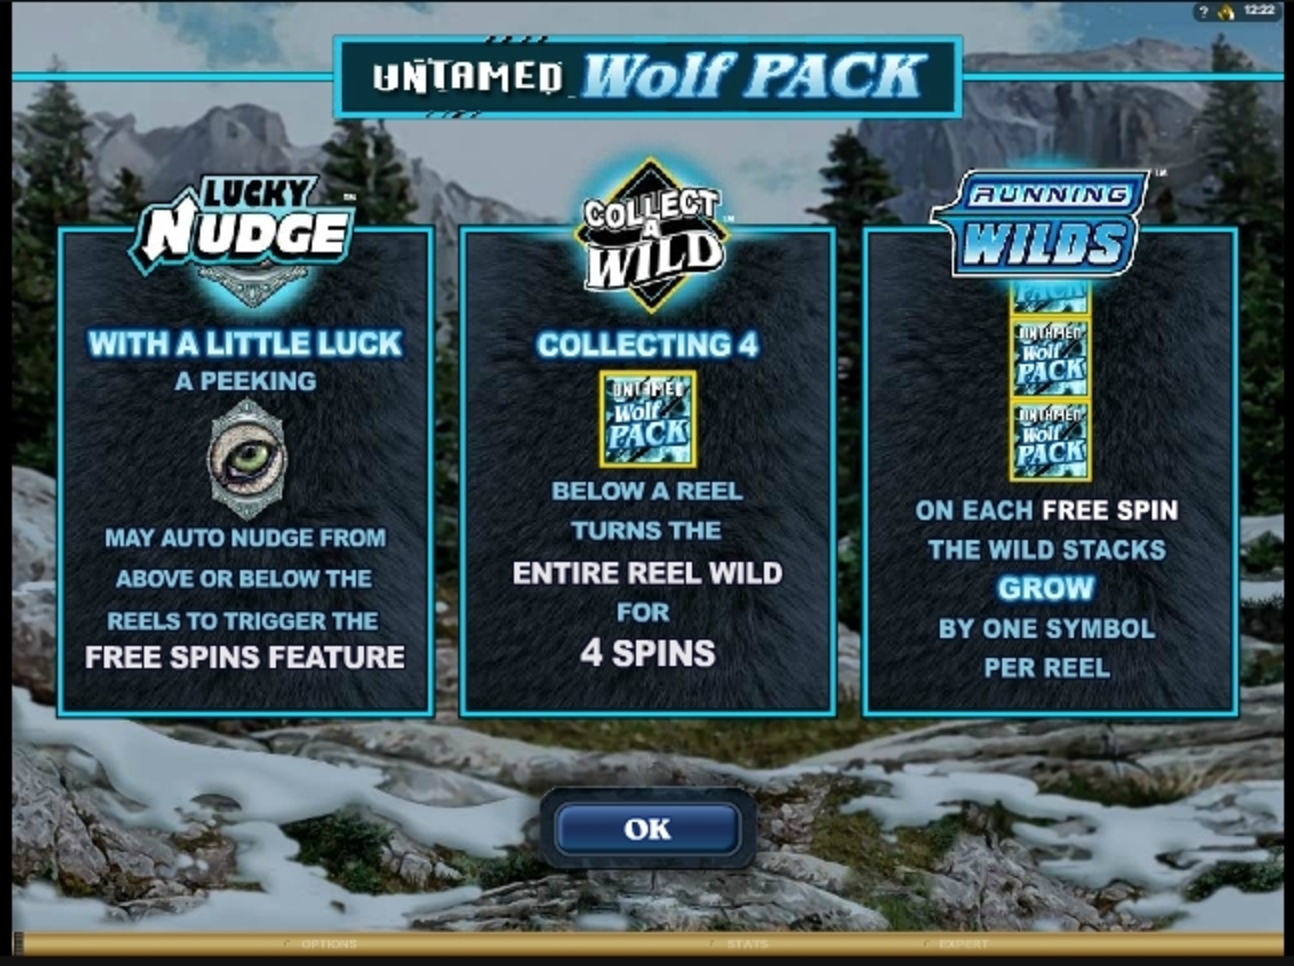 Play Untamed Wolf Pack Free Casino Slot Game by Microgaming